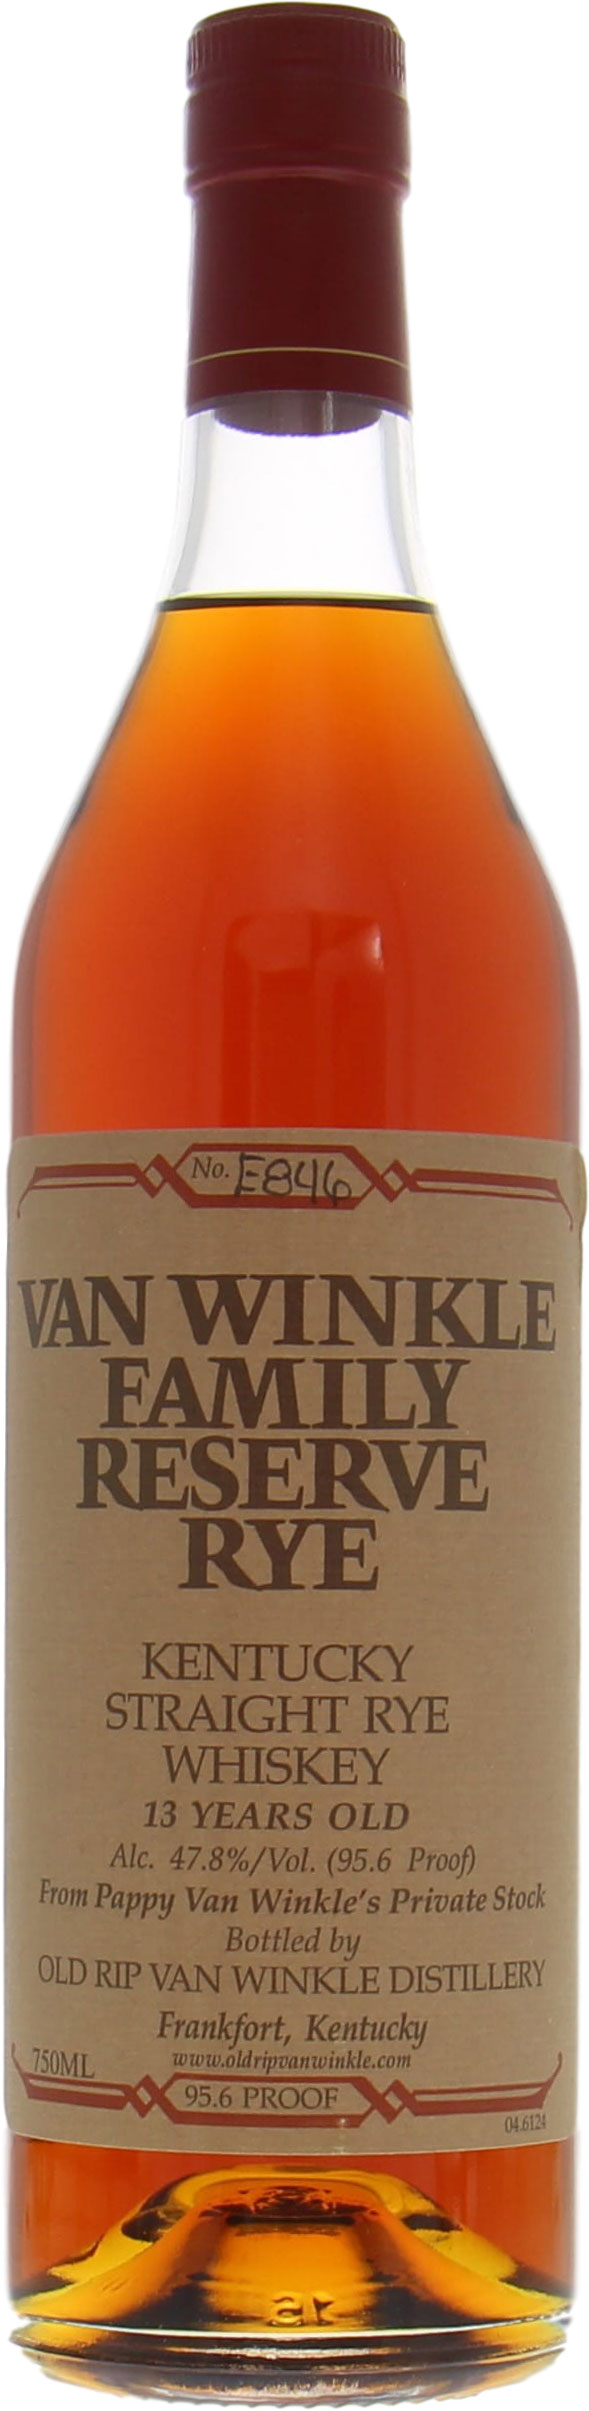 Van Winkle - Rye 13 Years Old Family Reserve No. E846 95.6 Proof 47.8% NV Perfect